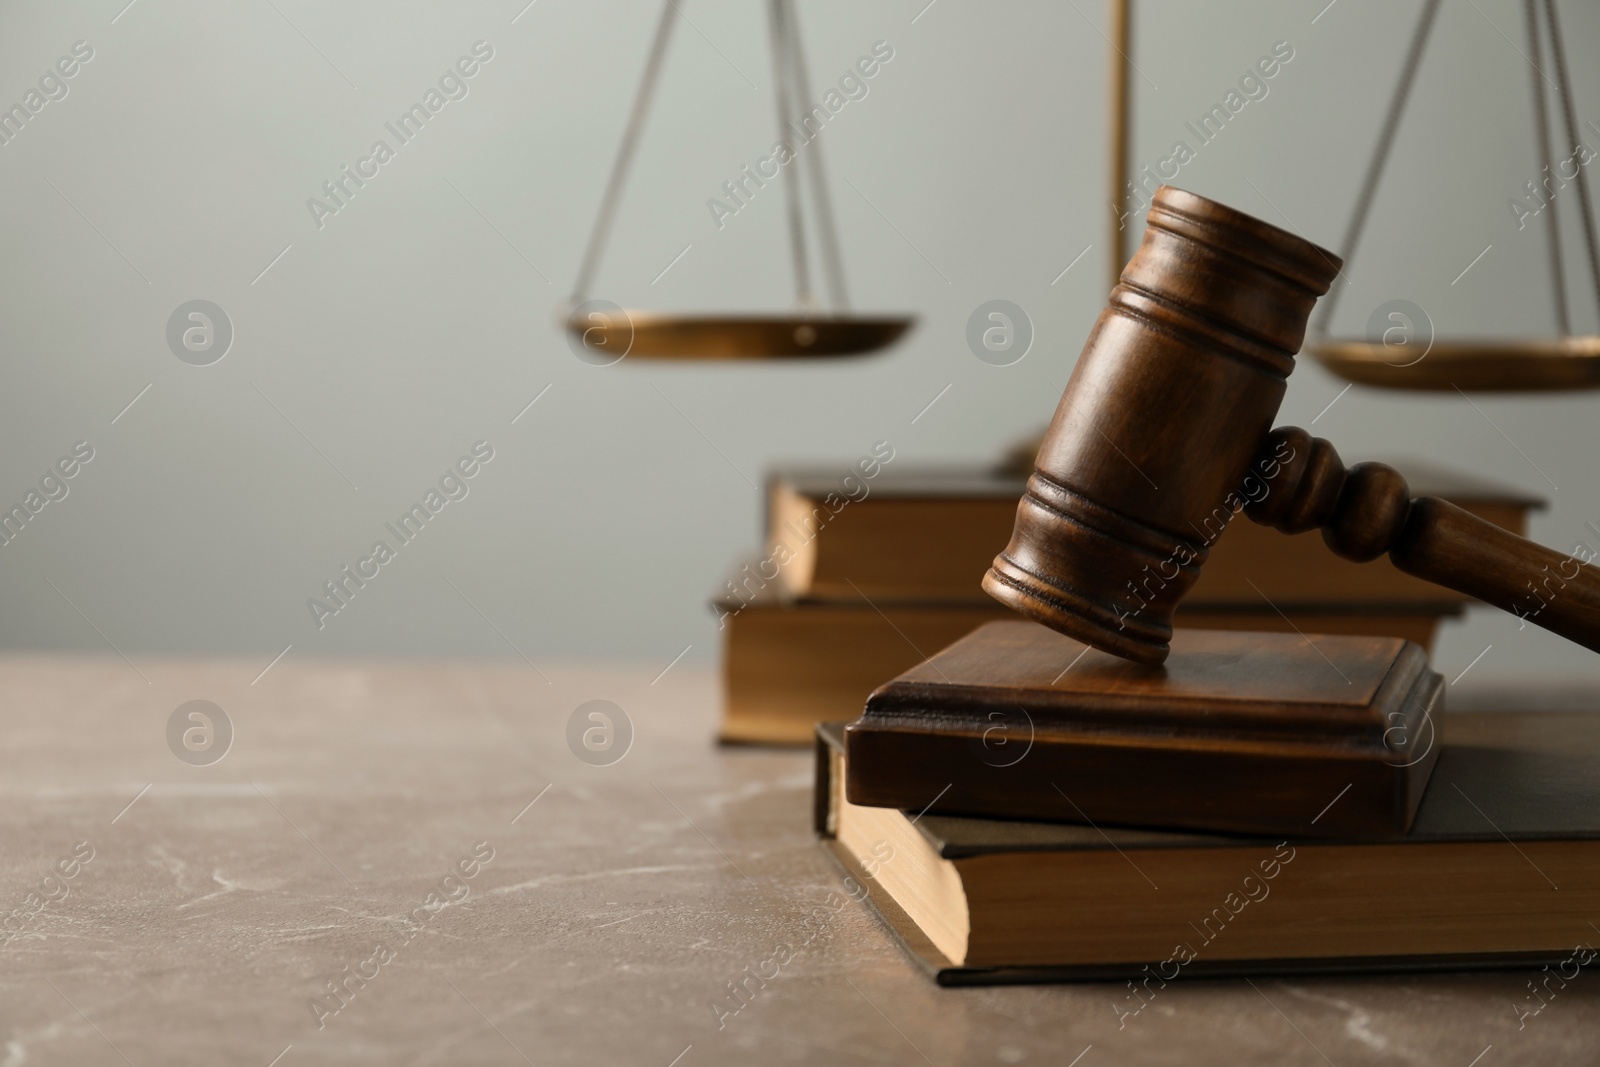 Photo of Wooden gavel with scales of justice and books on table. Law concept